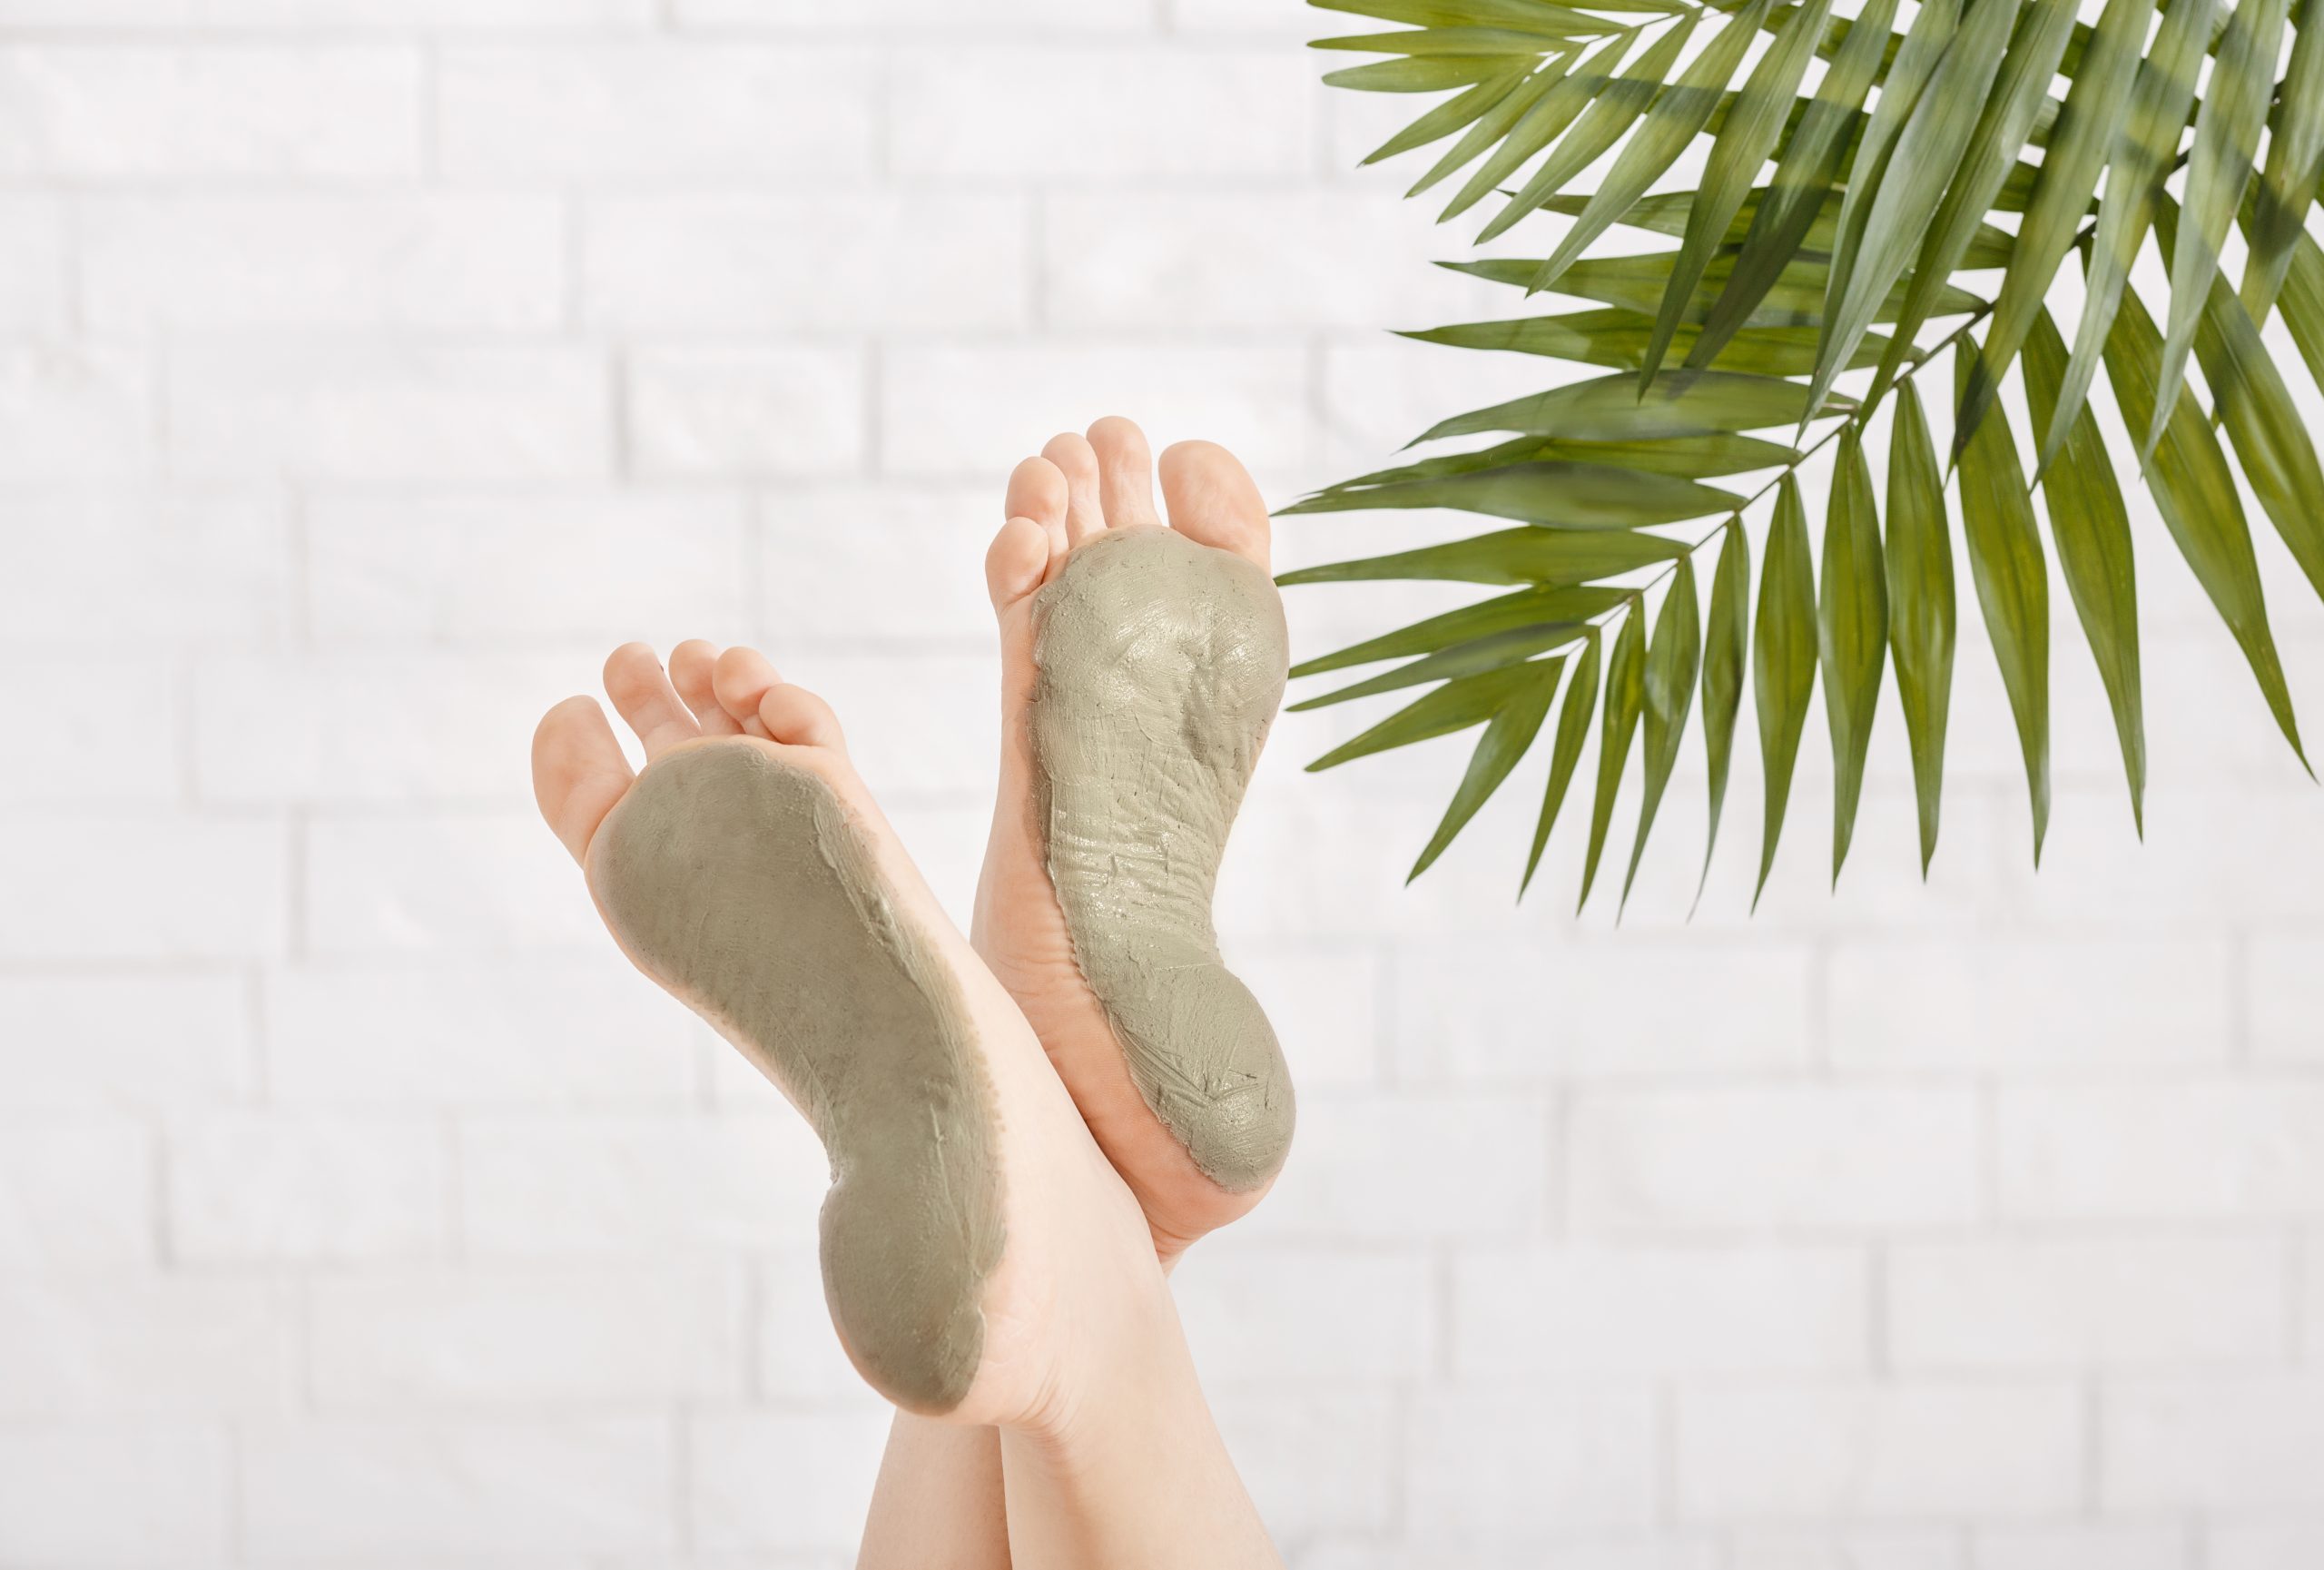 Foot care concept by putting green clay mask on feet on white brick wall